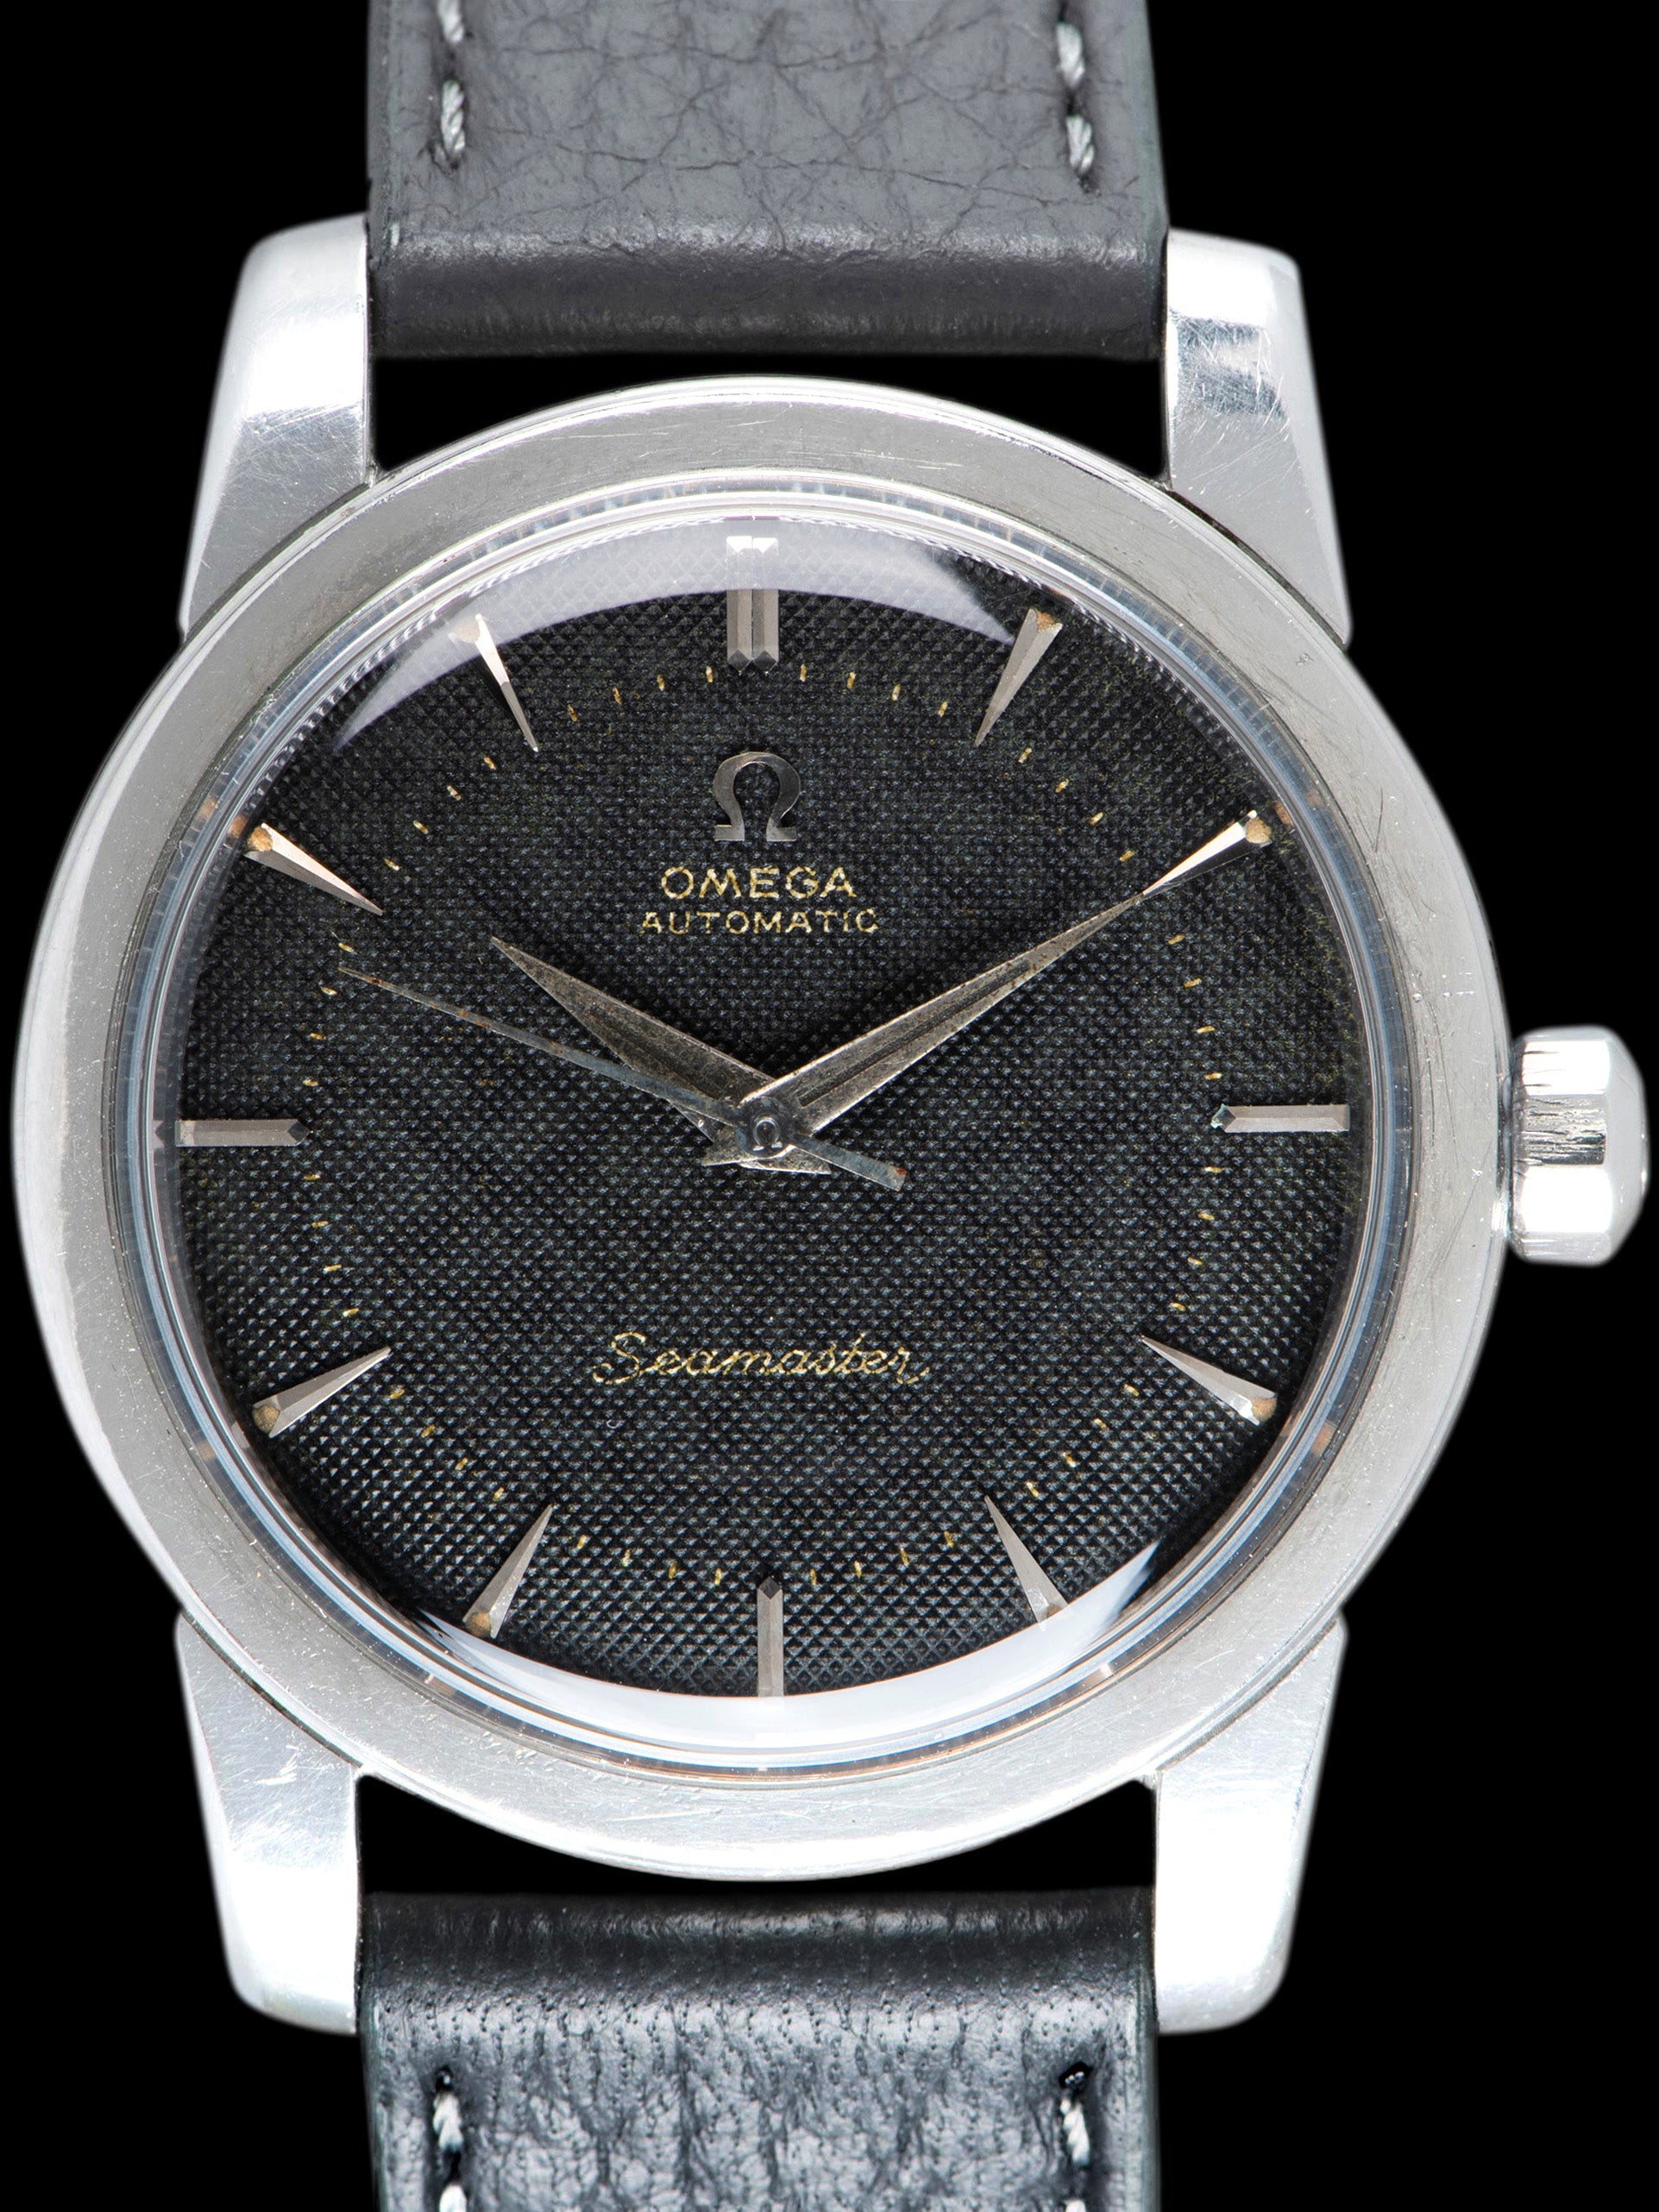 1954 Omega Seamaster Automatic (Ref. C 2577-12 SC) Cal. 354 "Honeycomb Dial"